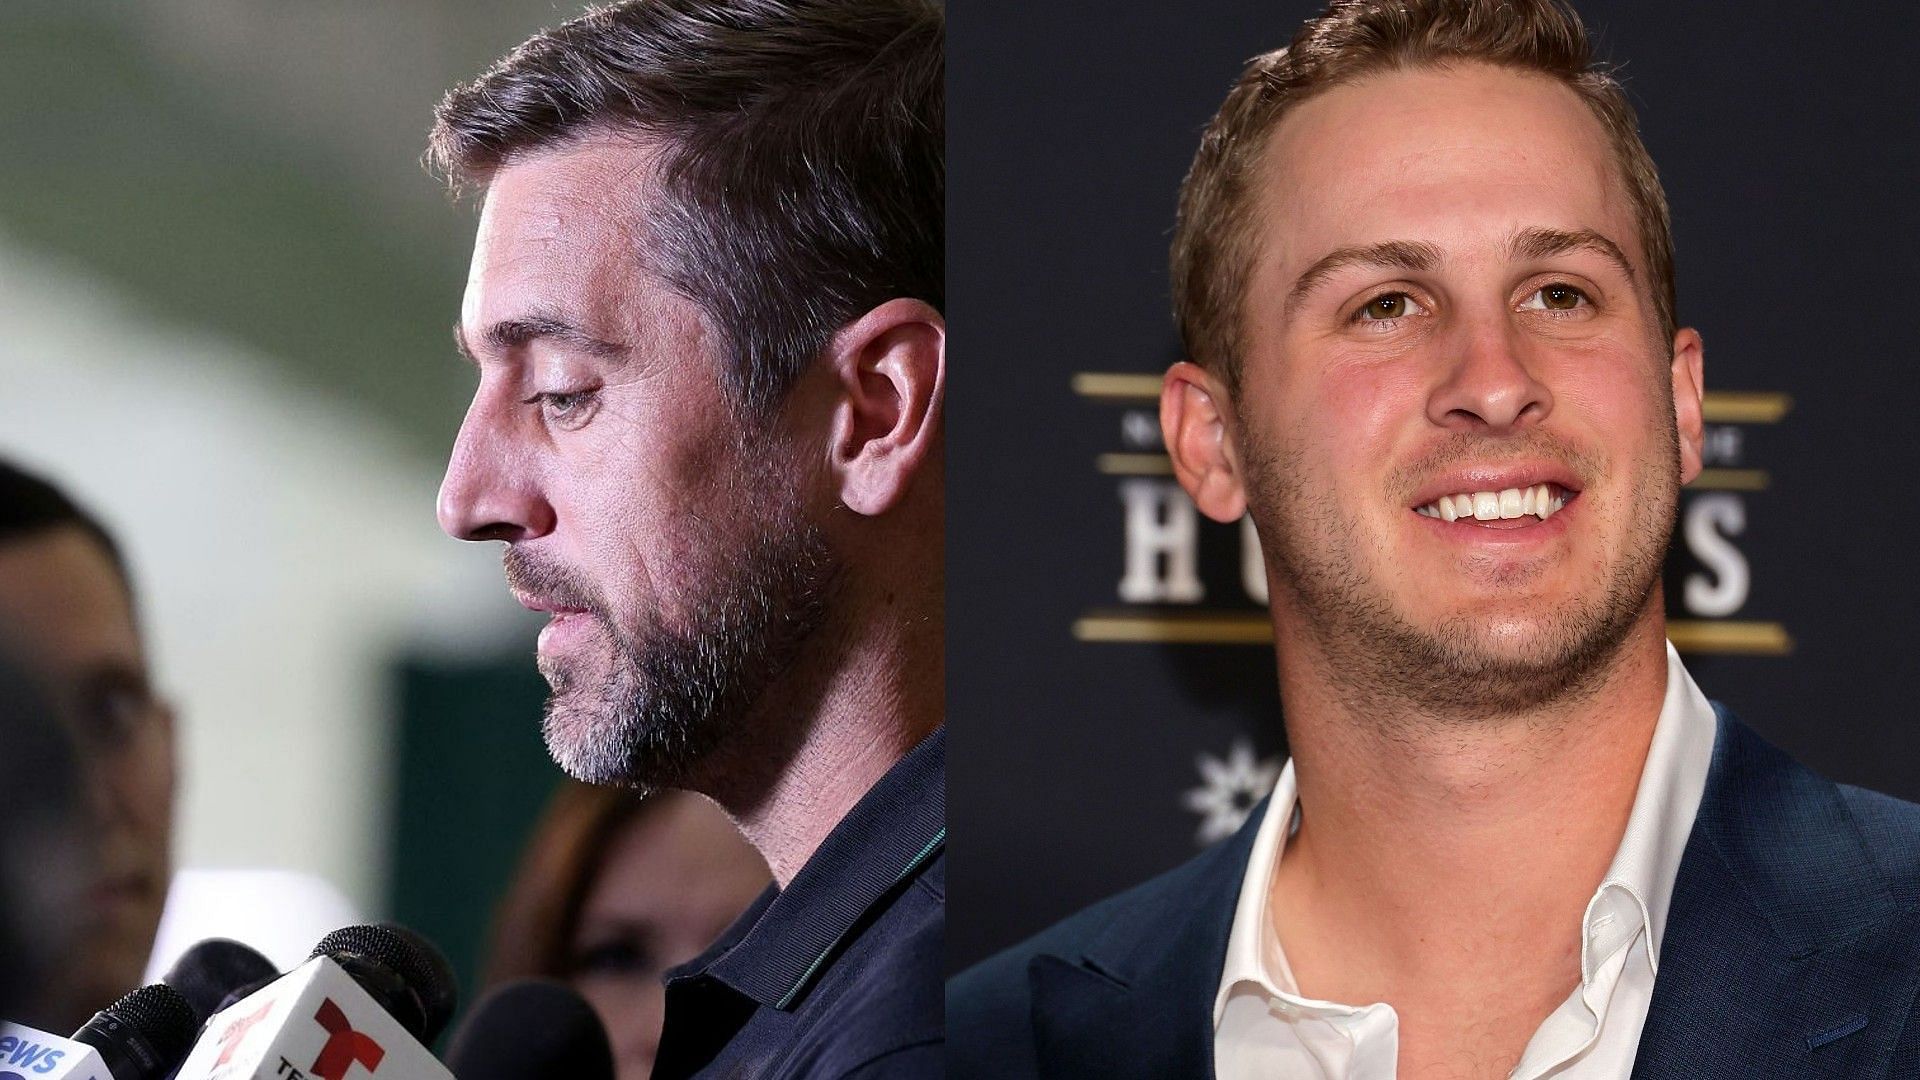 Aaron Rodgers gets clowned by Jared Goff